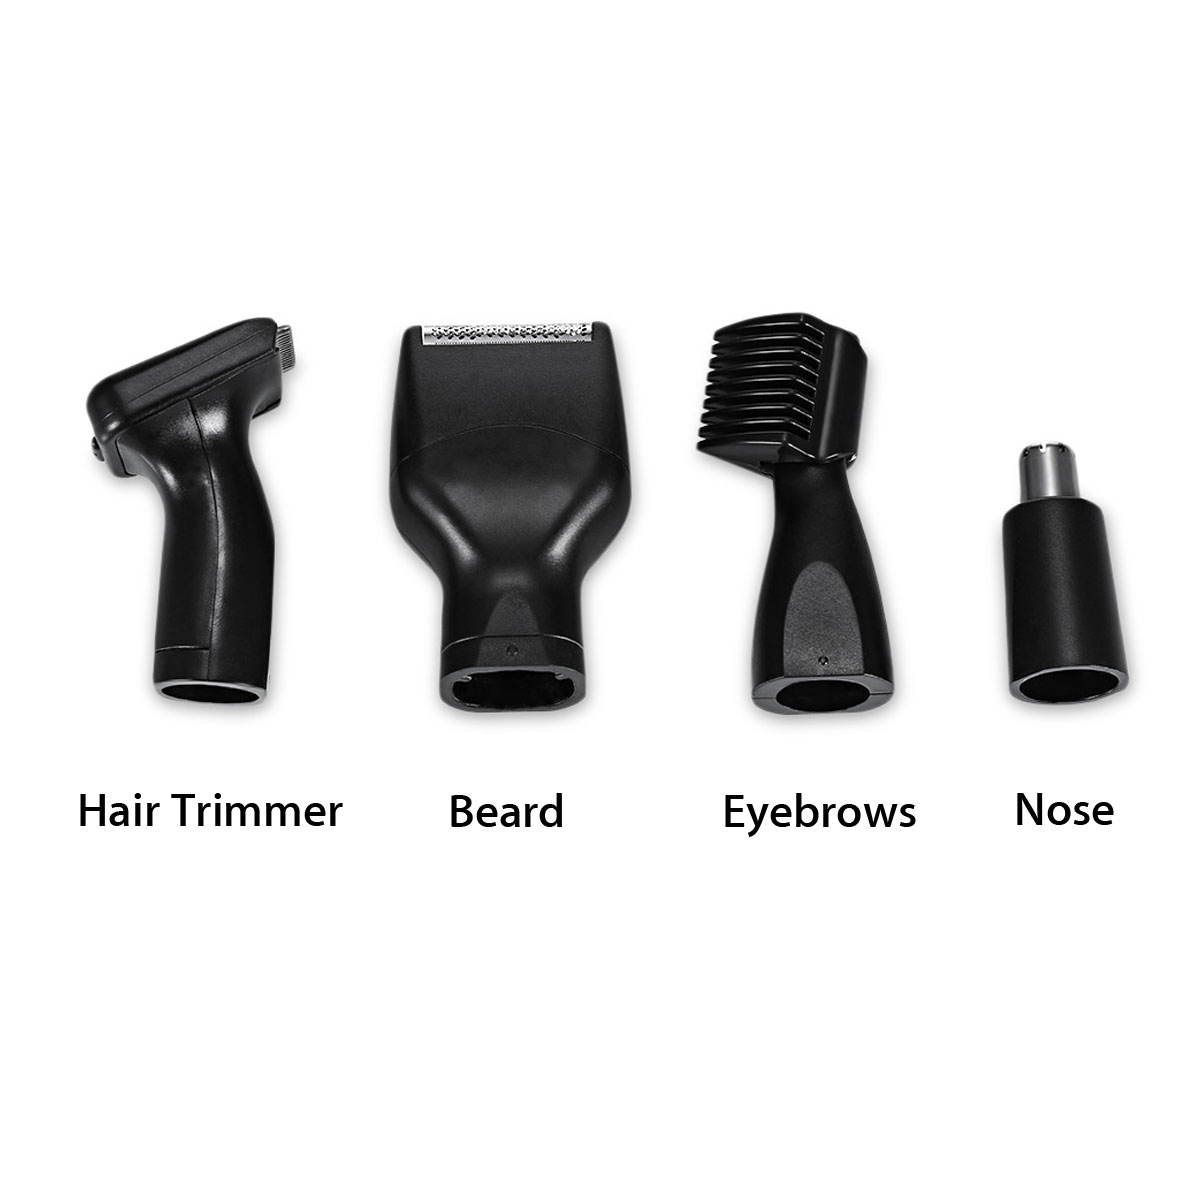 Kemei-4-in-1-Nose-Hair-Beard-Eyebrow-Rechargeable-Electric-Trimmer-Electric-Nose-Trimmer-Ear-Shaver-1409747